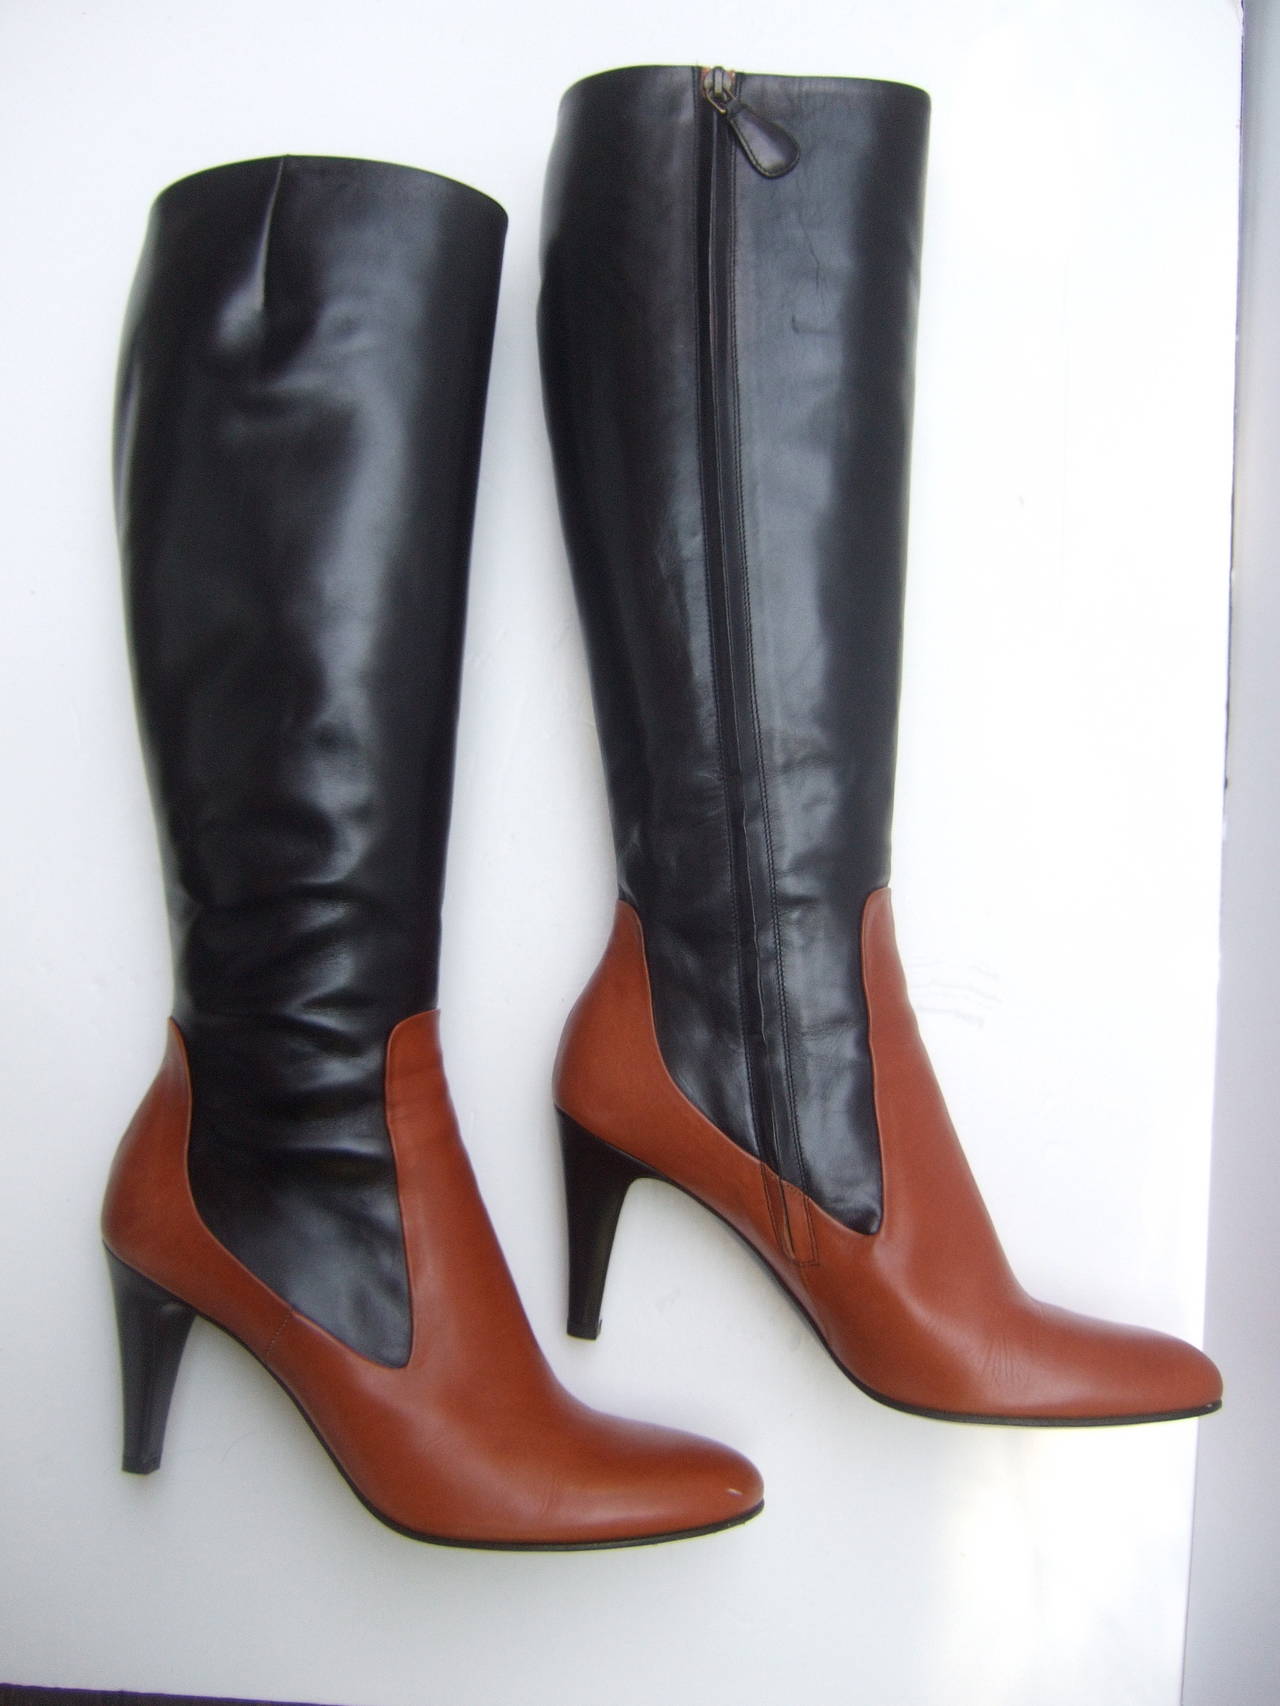 Alexander McQueen Black & brown leather boots. Made in Italy Size 39.5
The stylish designer boots are constructed with supple contrasting leather 
The high fashion boots have a unique design with an edge that was typical of McQueen creations